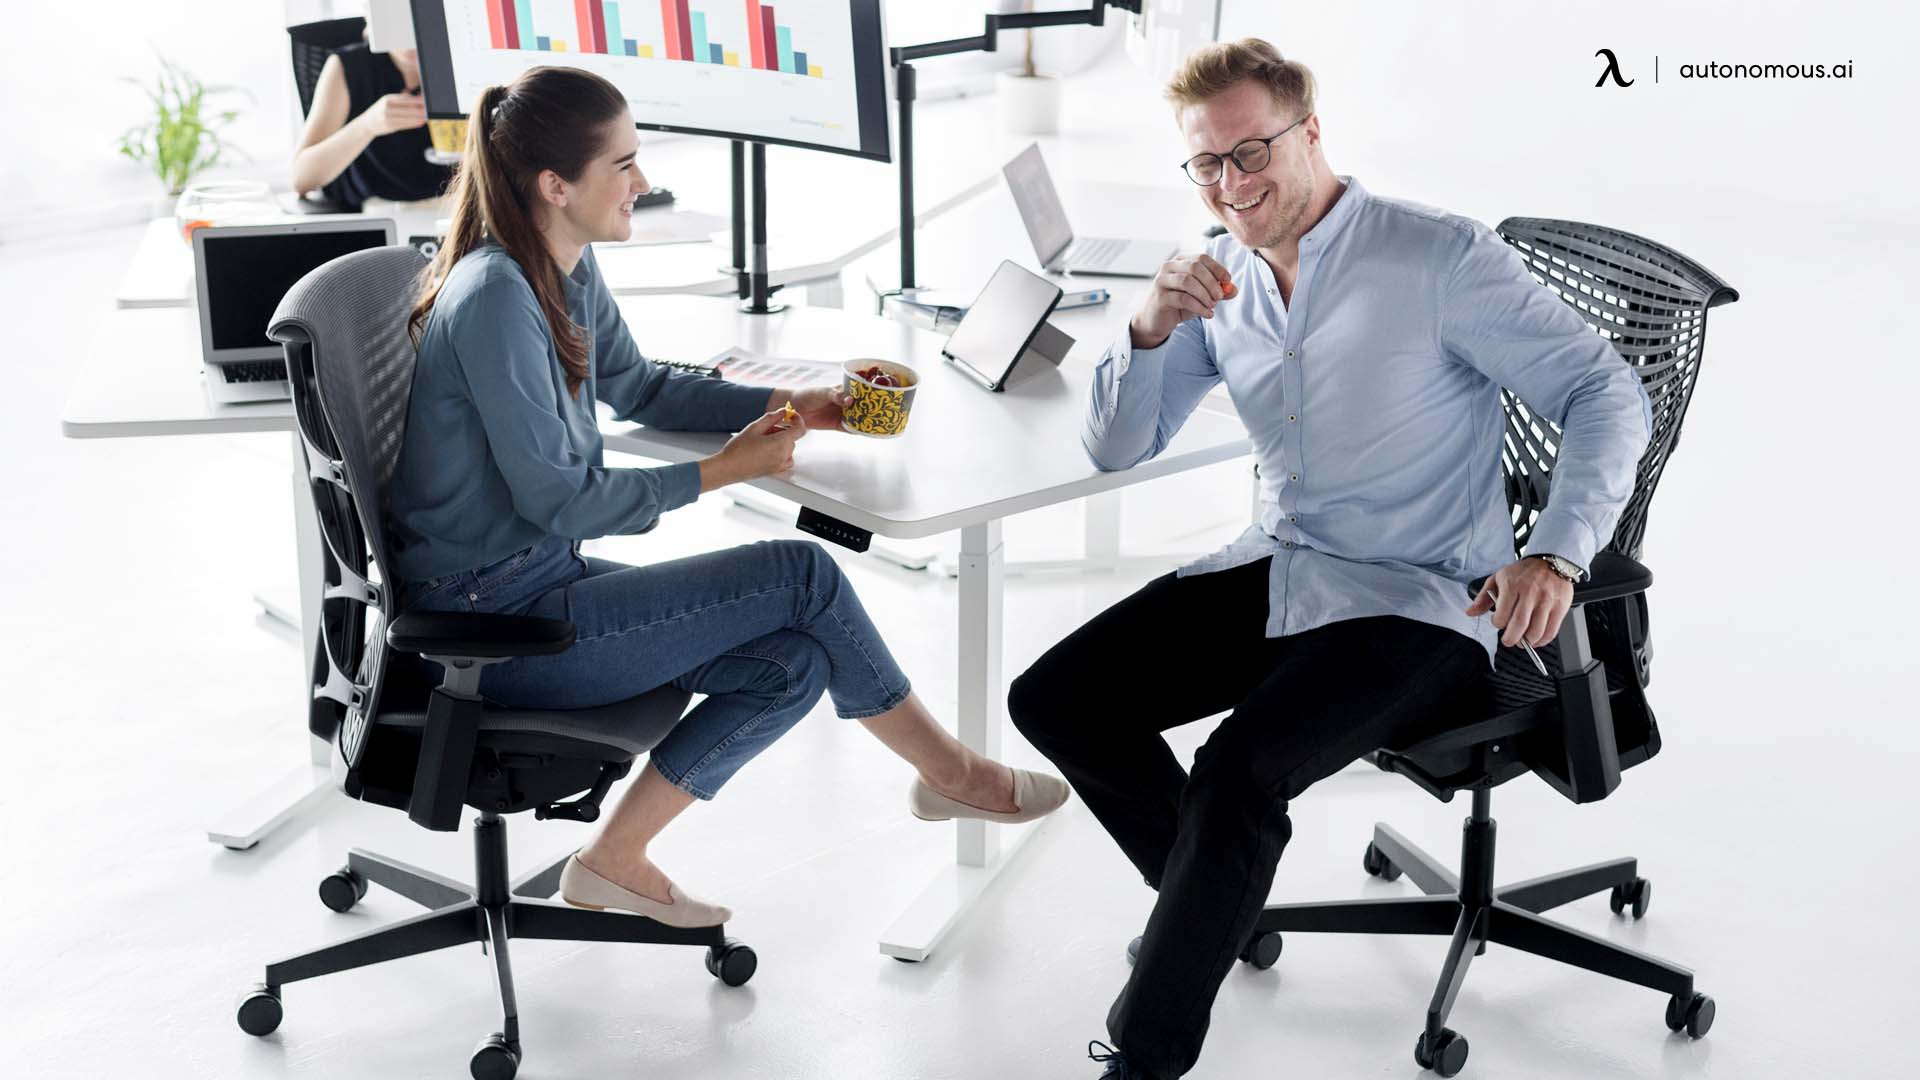 The Science Behind Ergonomic Chair Design